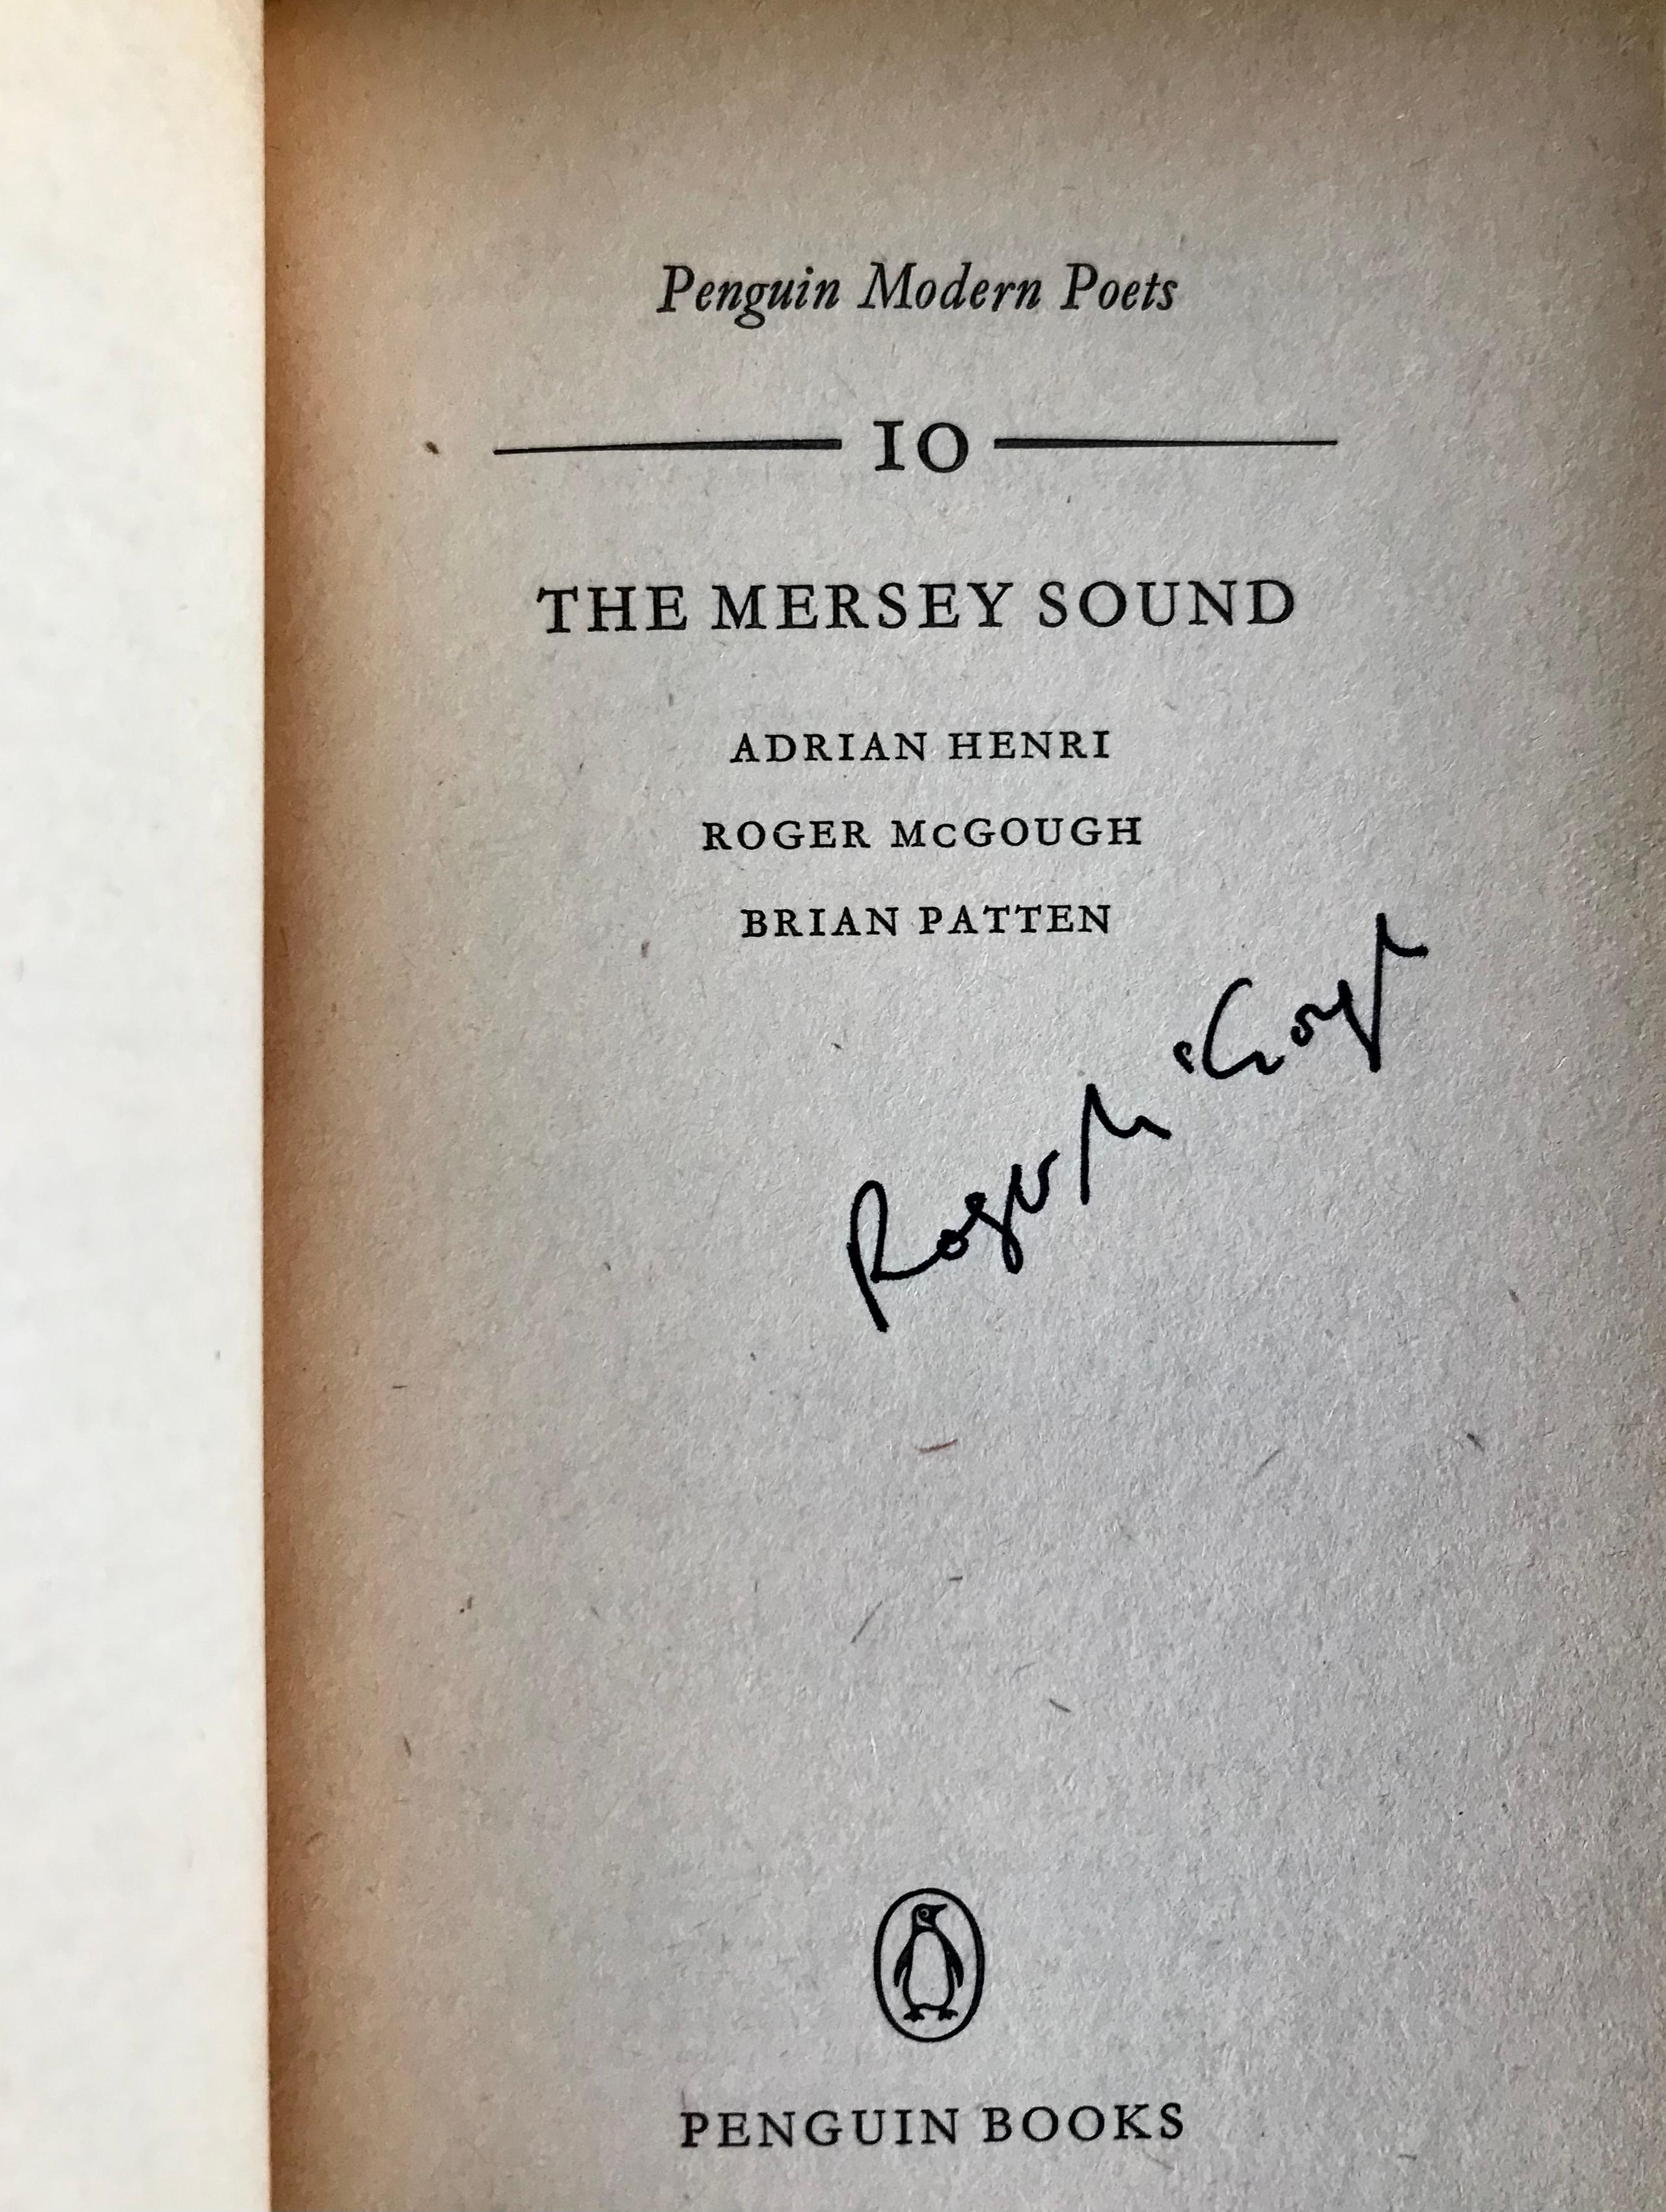 The Mersey Sound, Penguin Modern Poets No. 10 Signed by Roger McGough